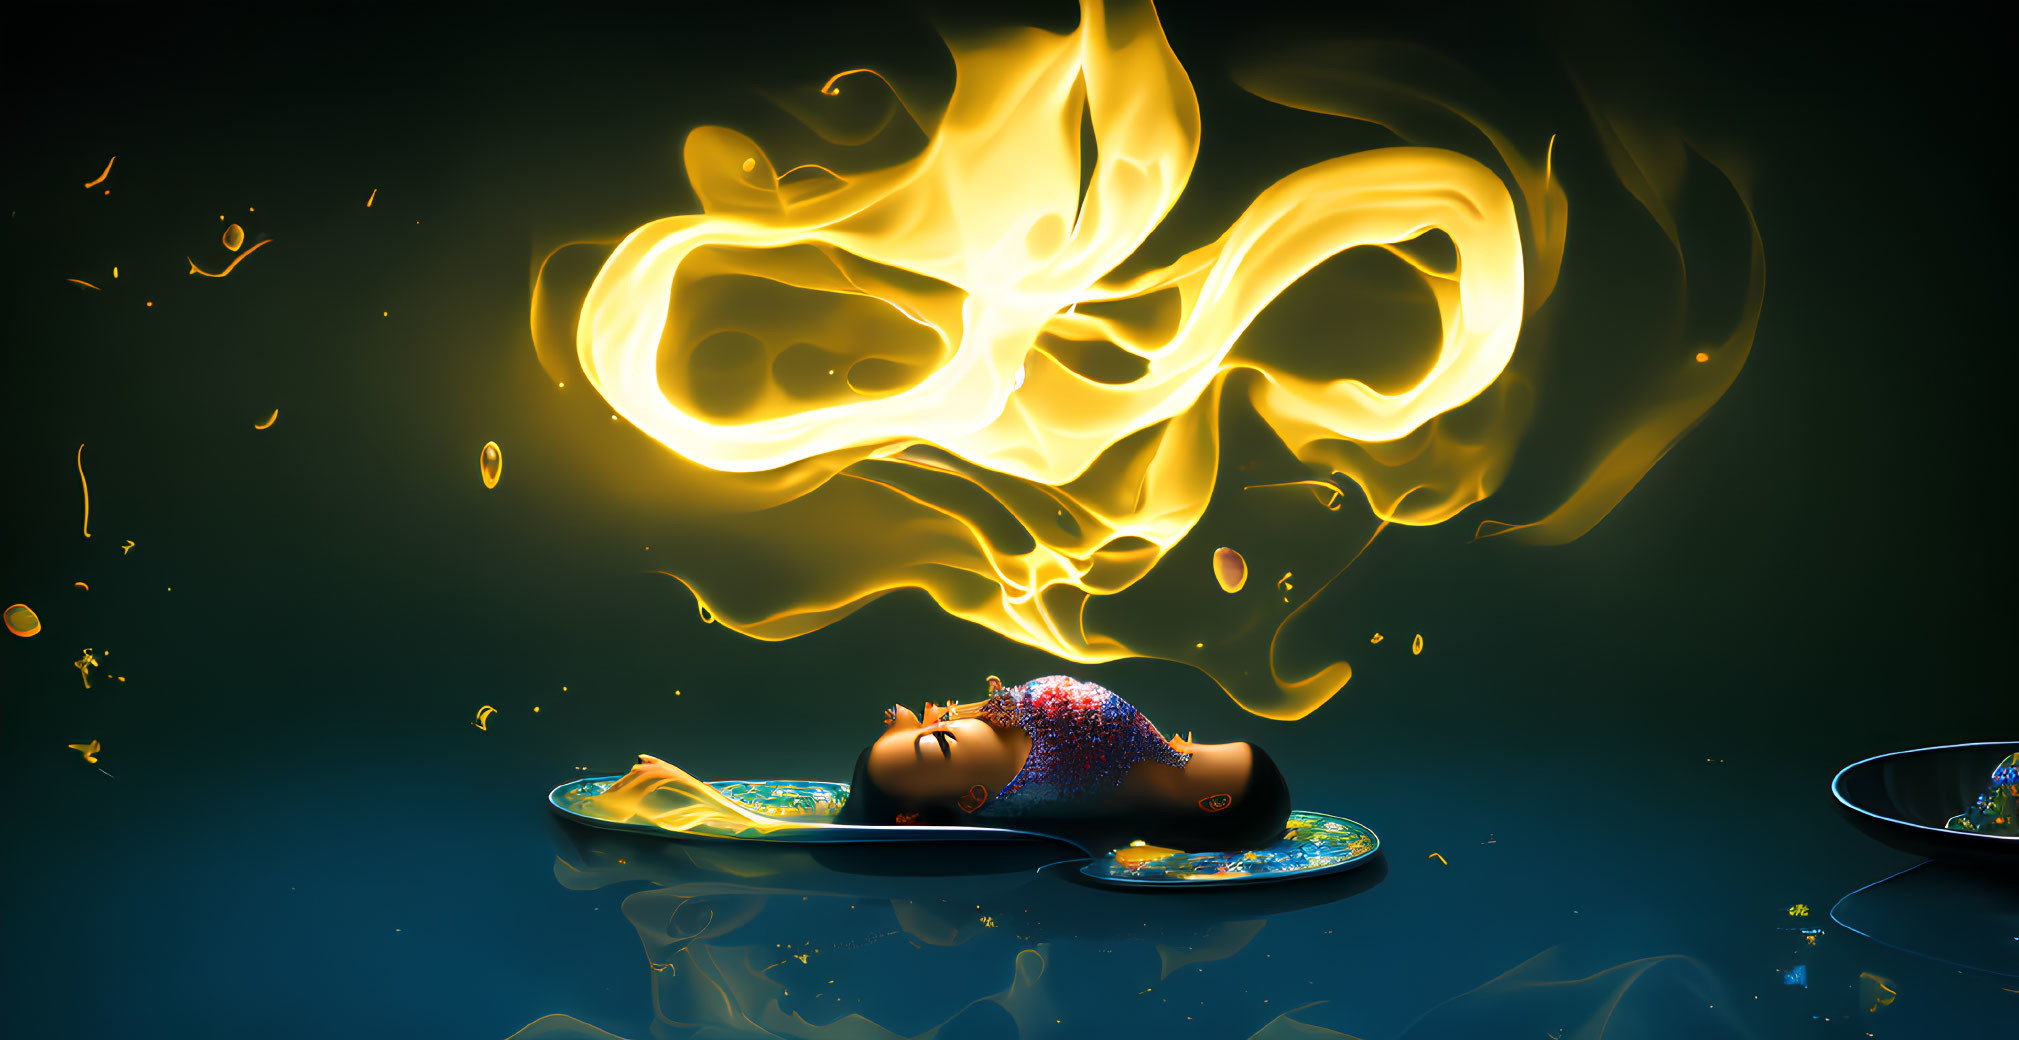 Surreal floating head with fiery shapes on dark background